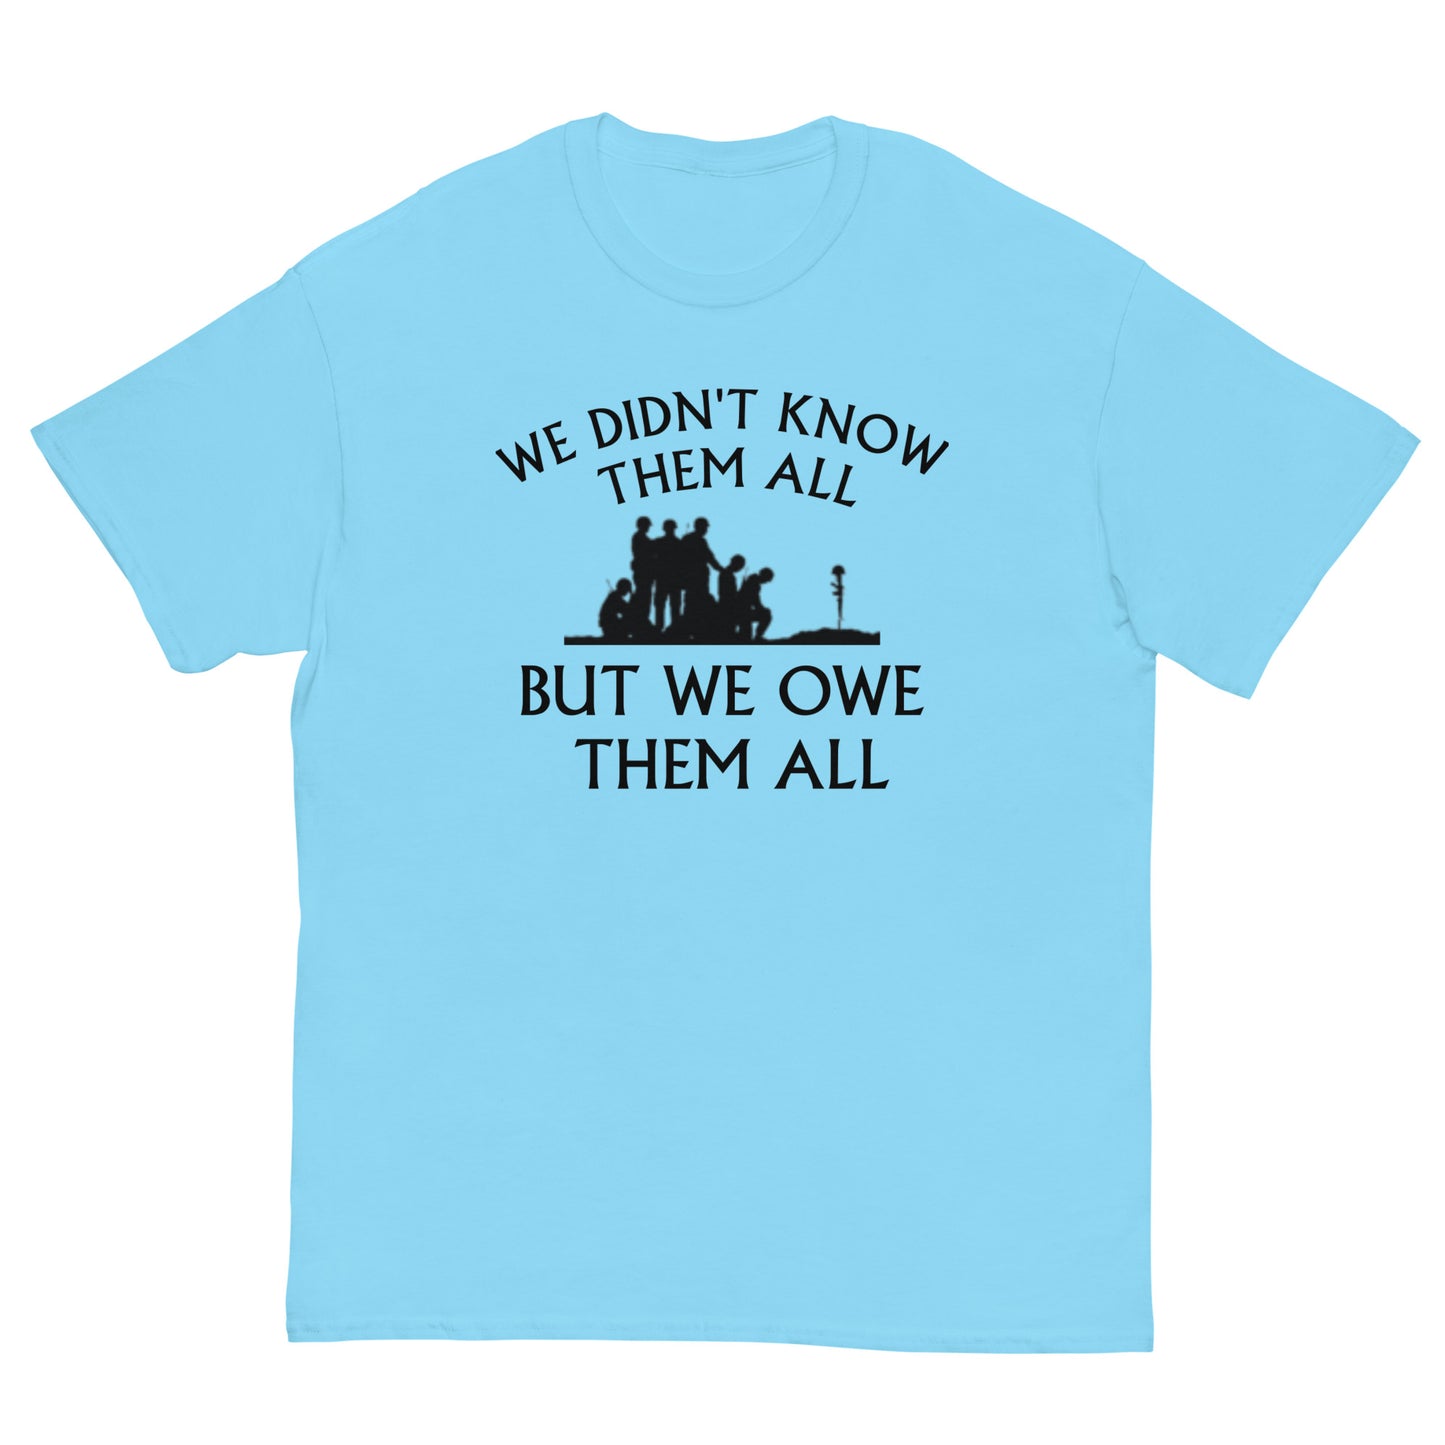 We didn't know them all but we OWE them all all classic tee